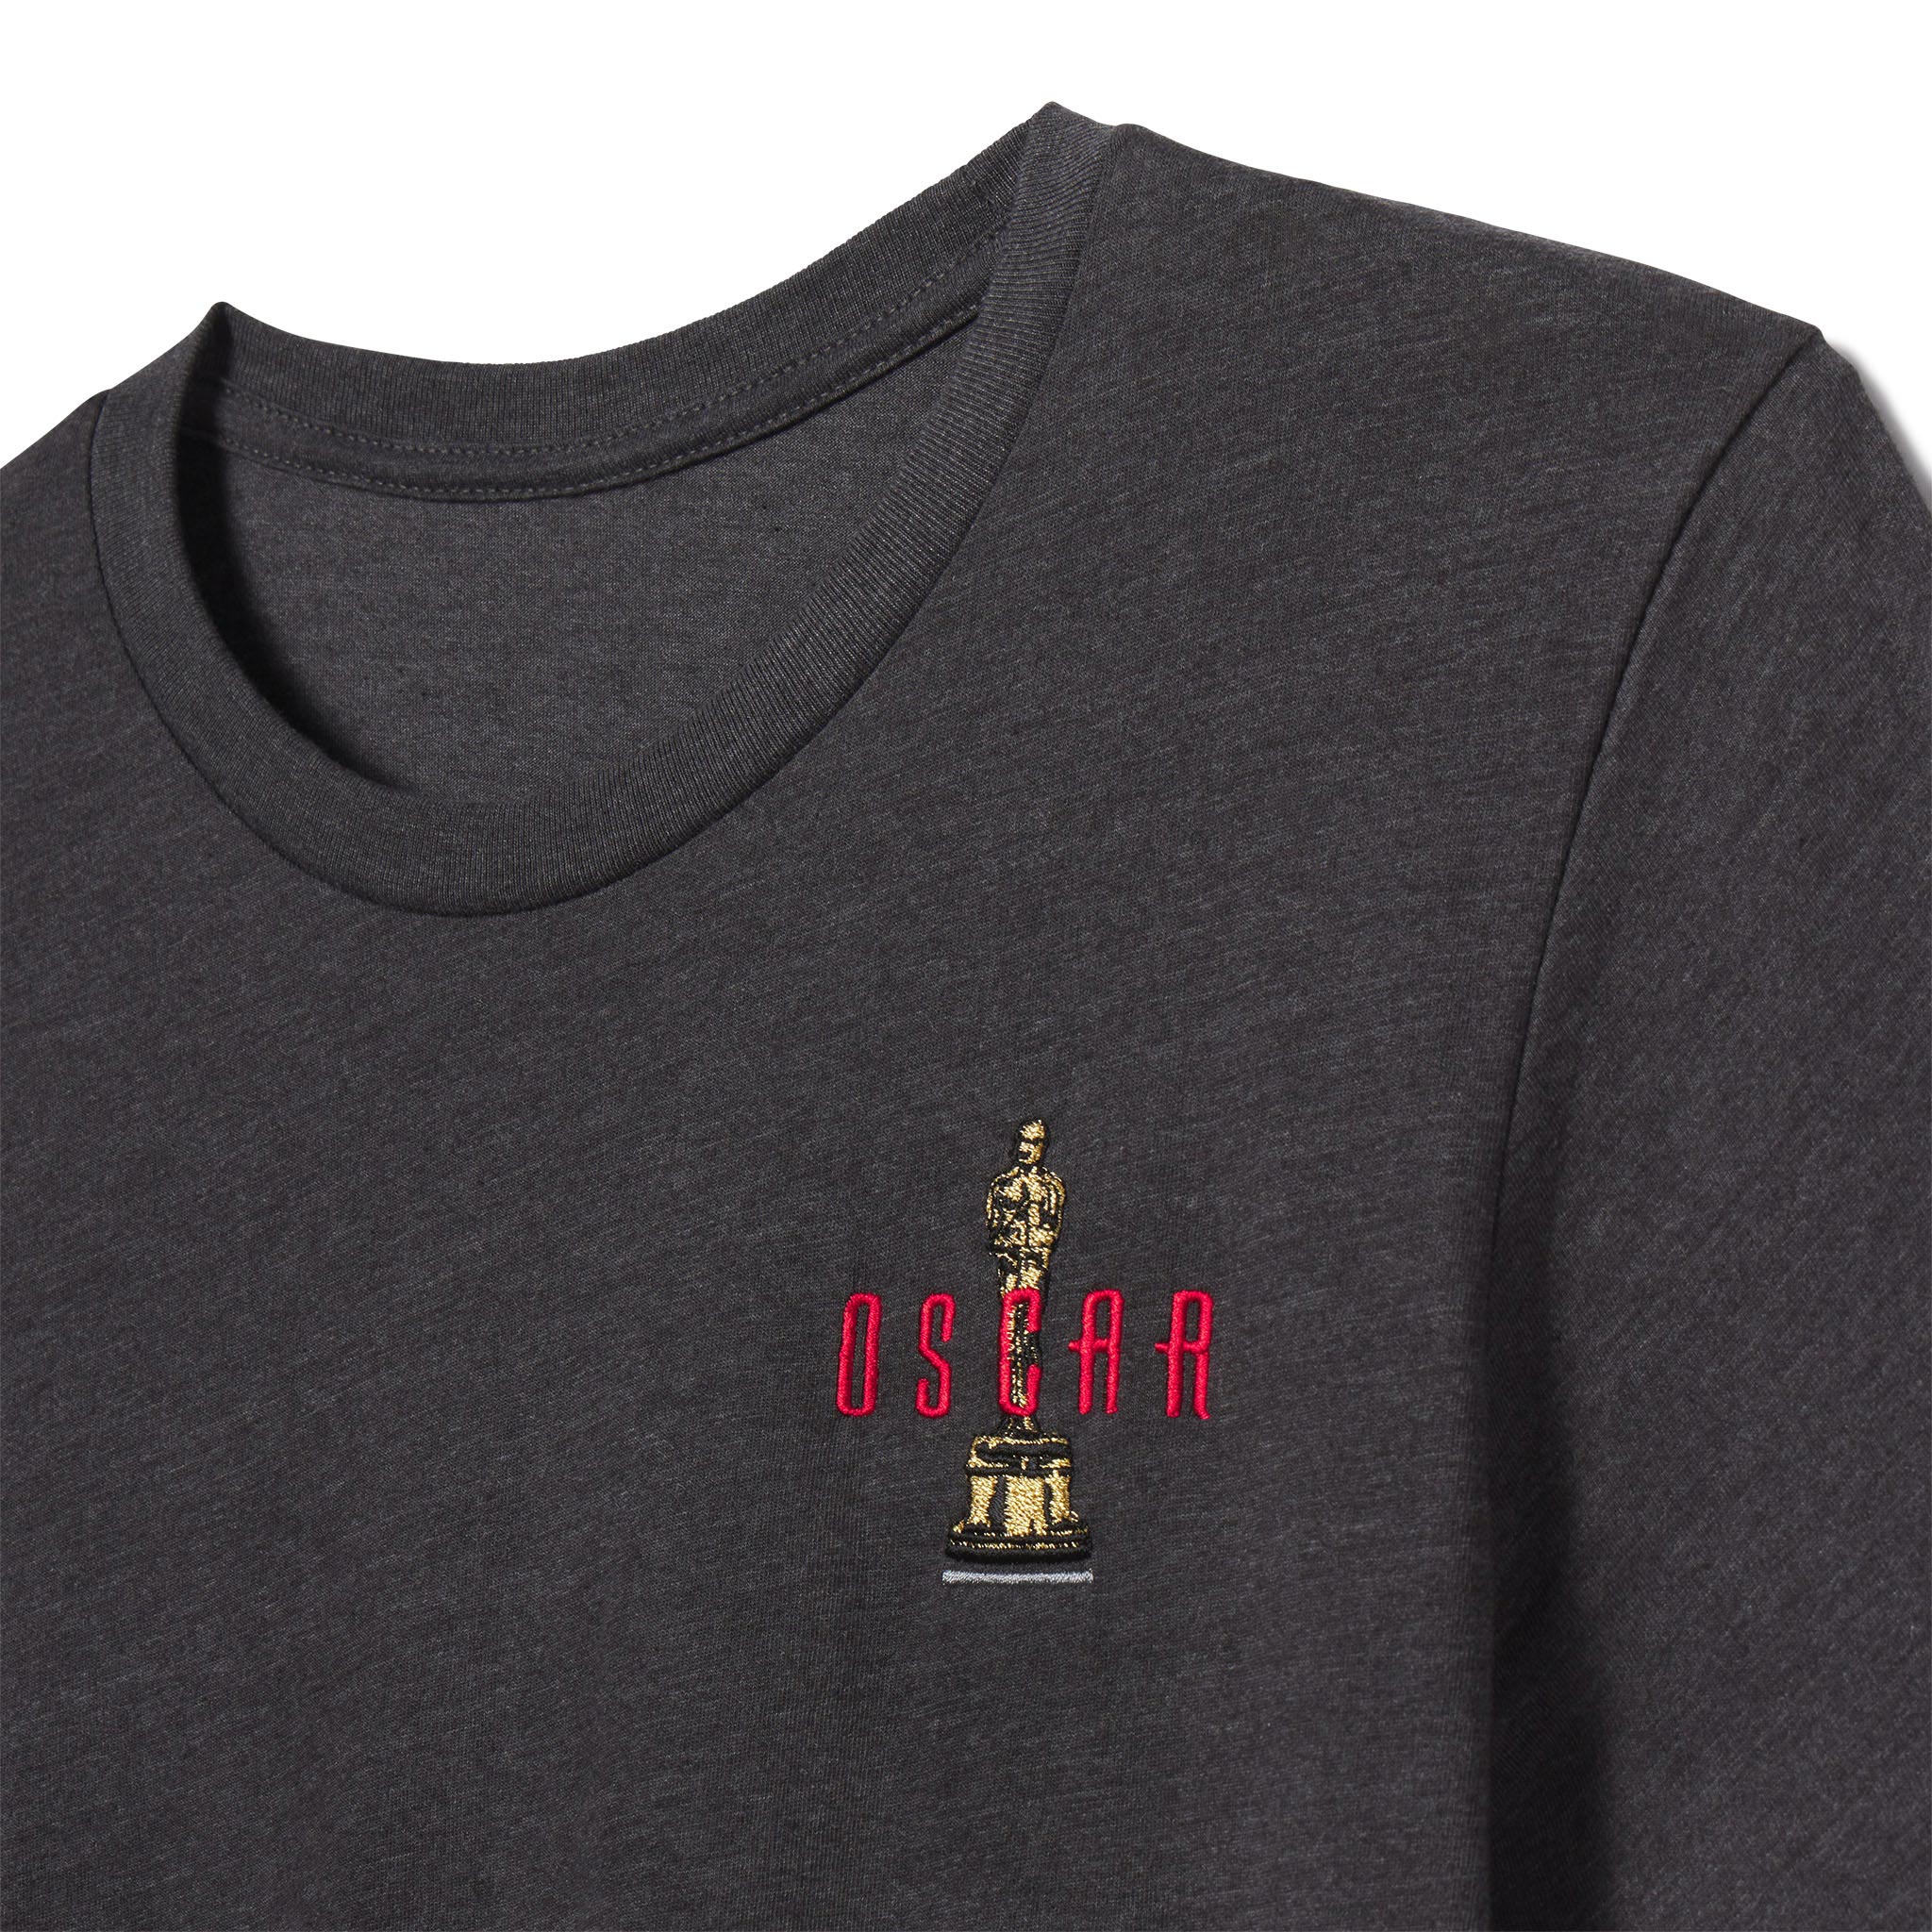 OSCAR EMBROIDERED TEE – Academy Museum Store